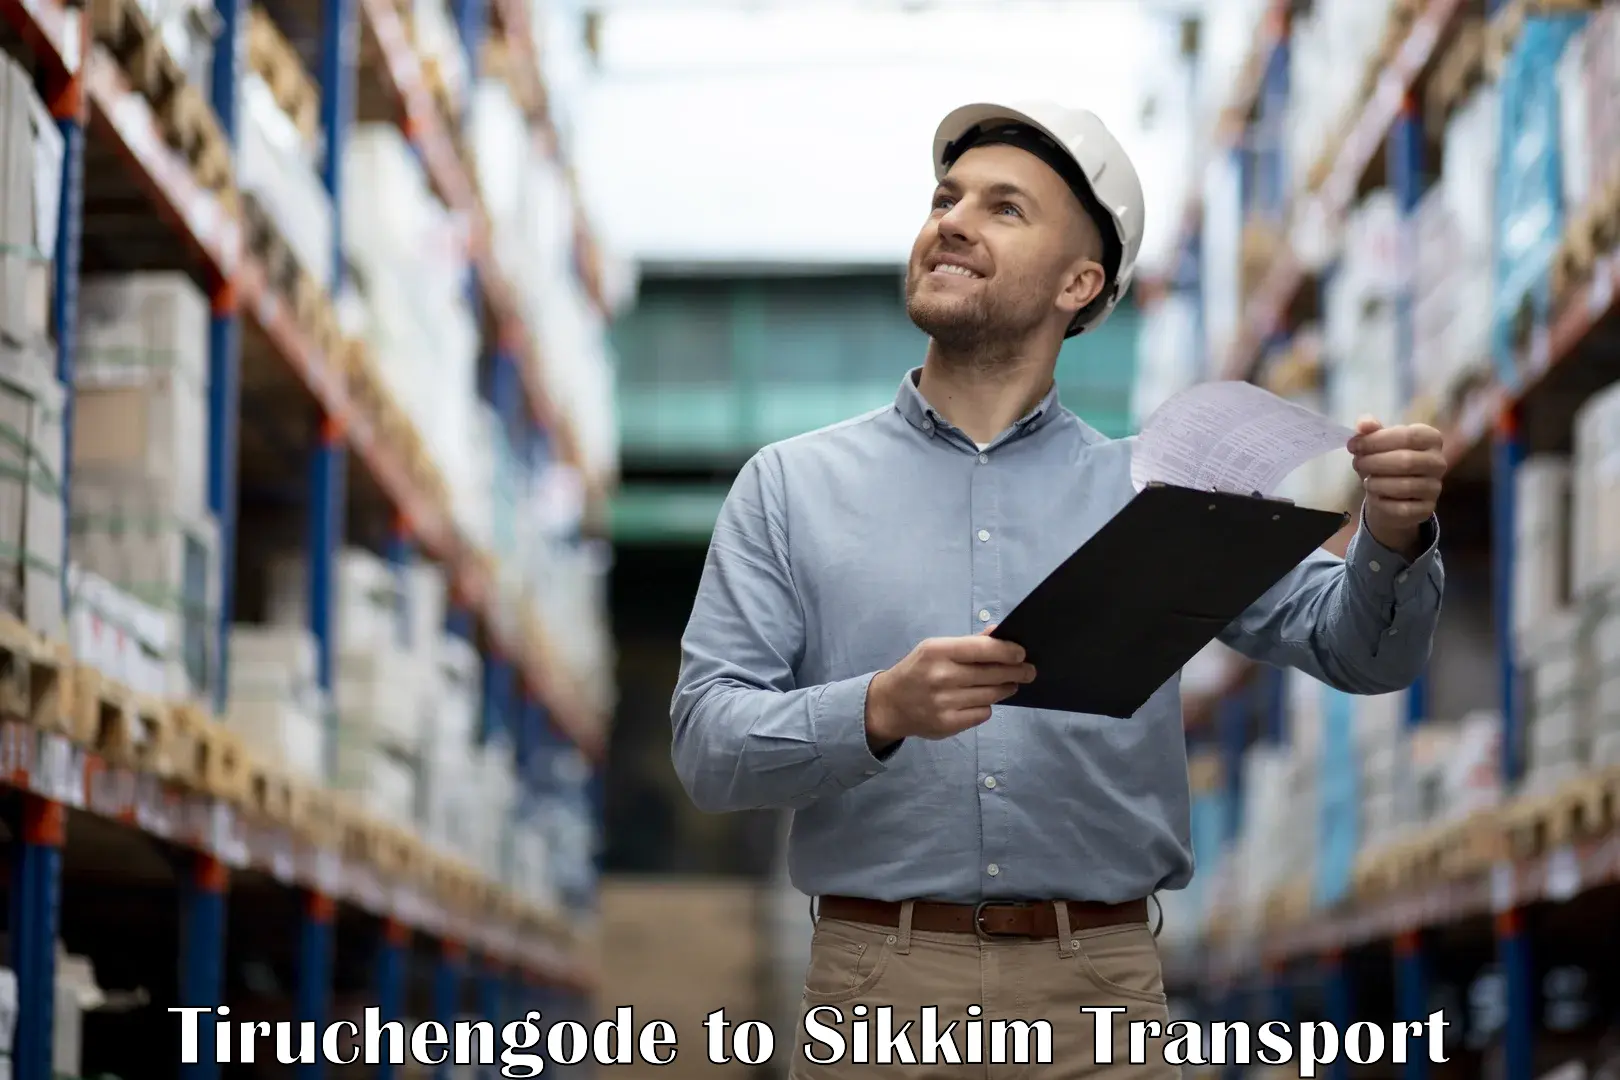 Delivery service Tiruchengode to Sikkim